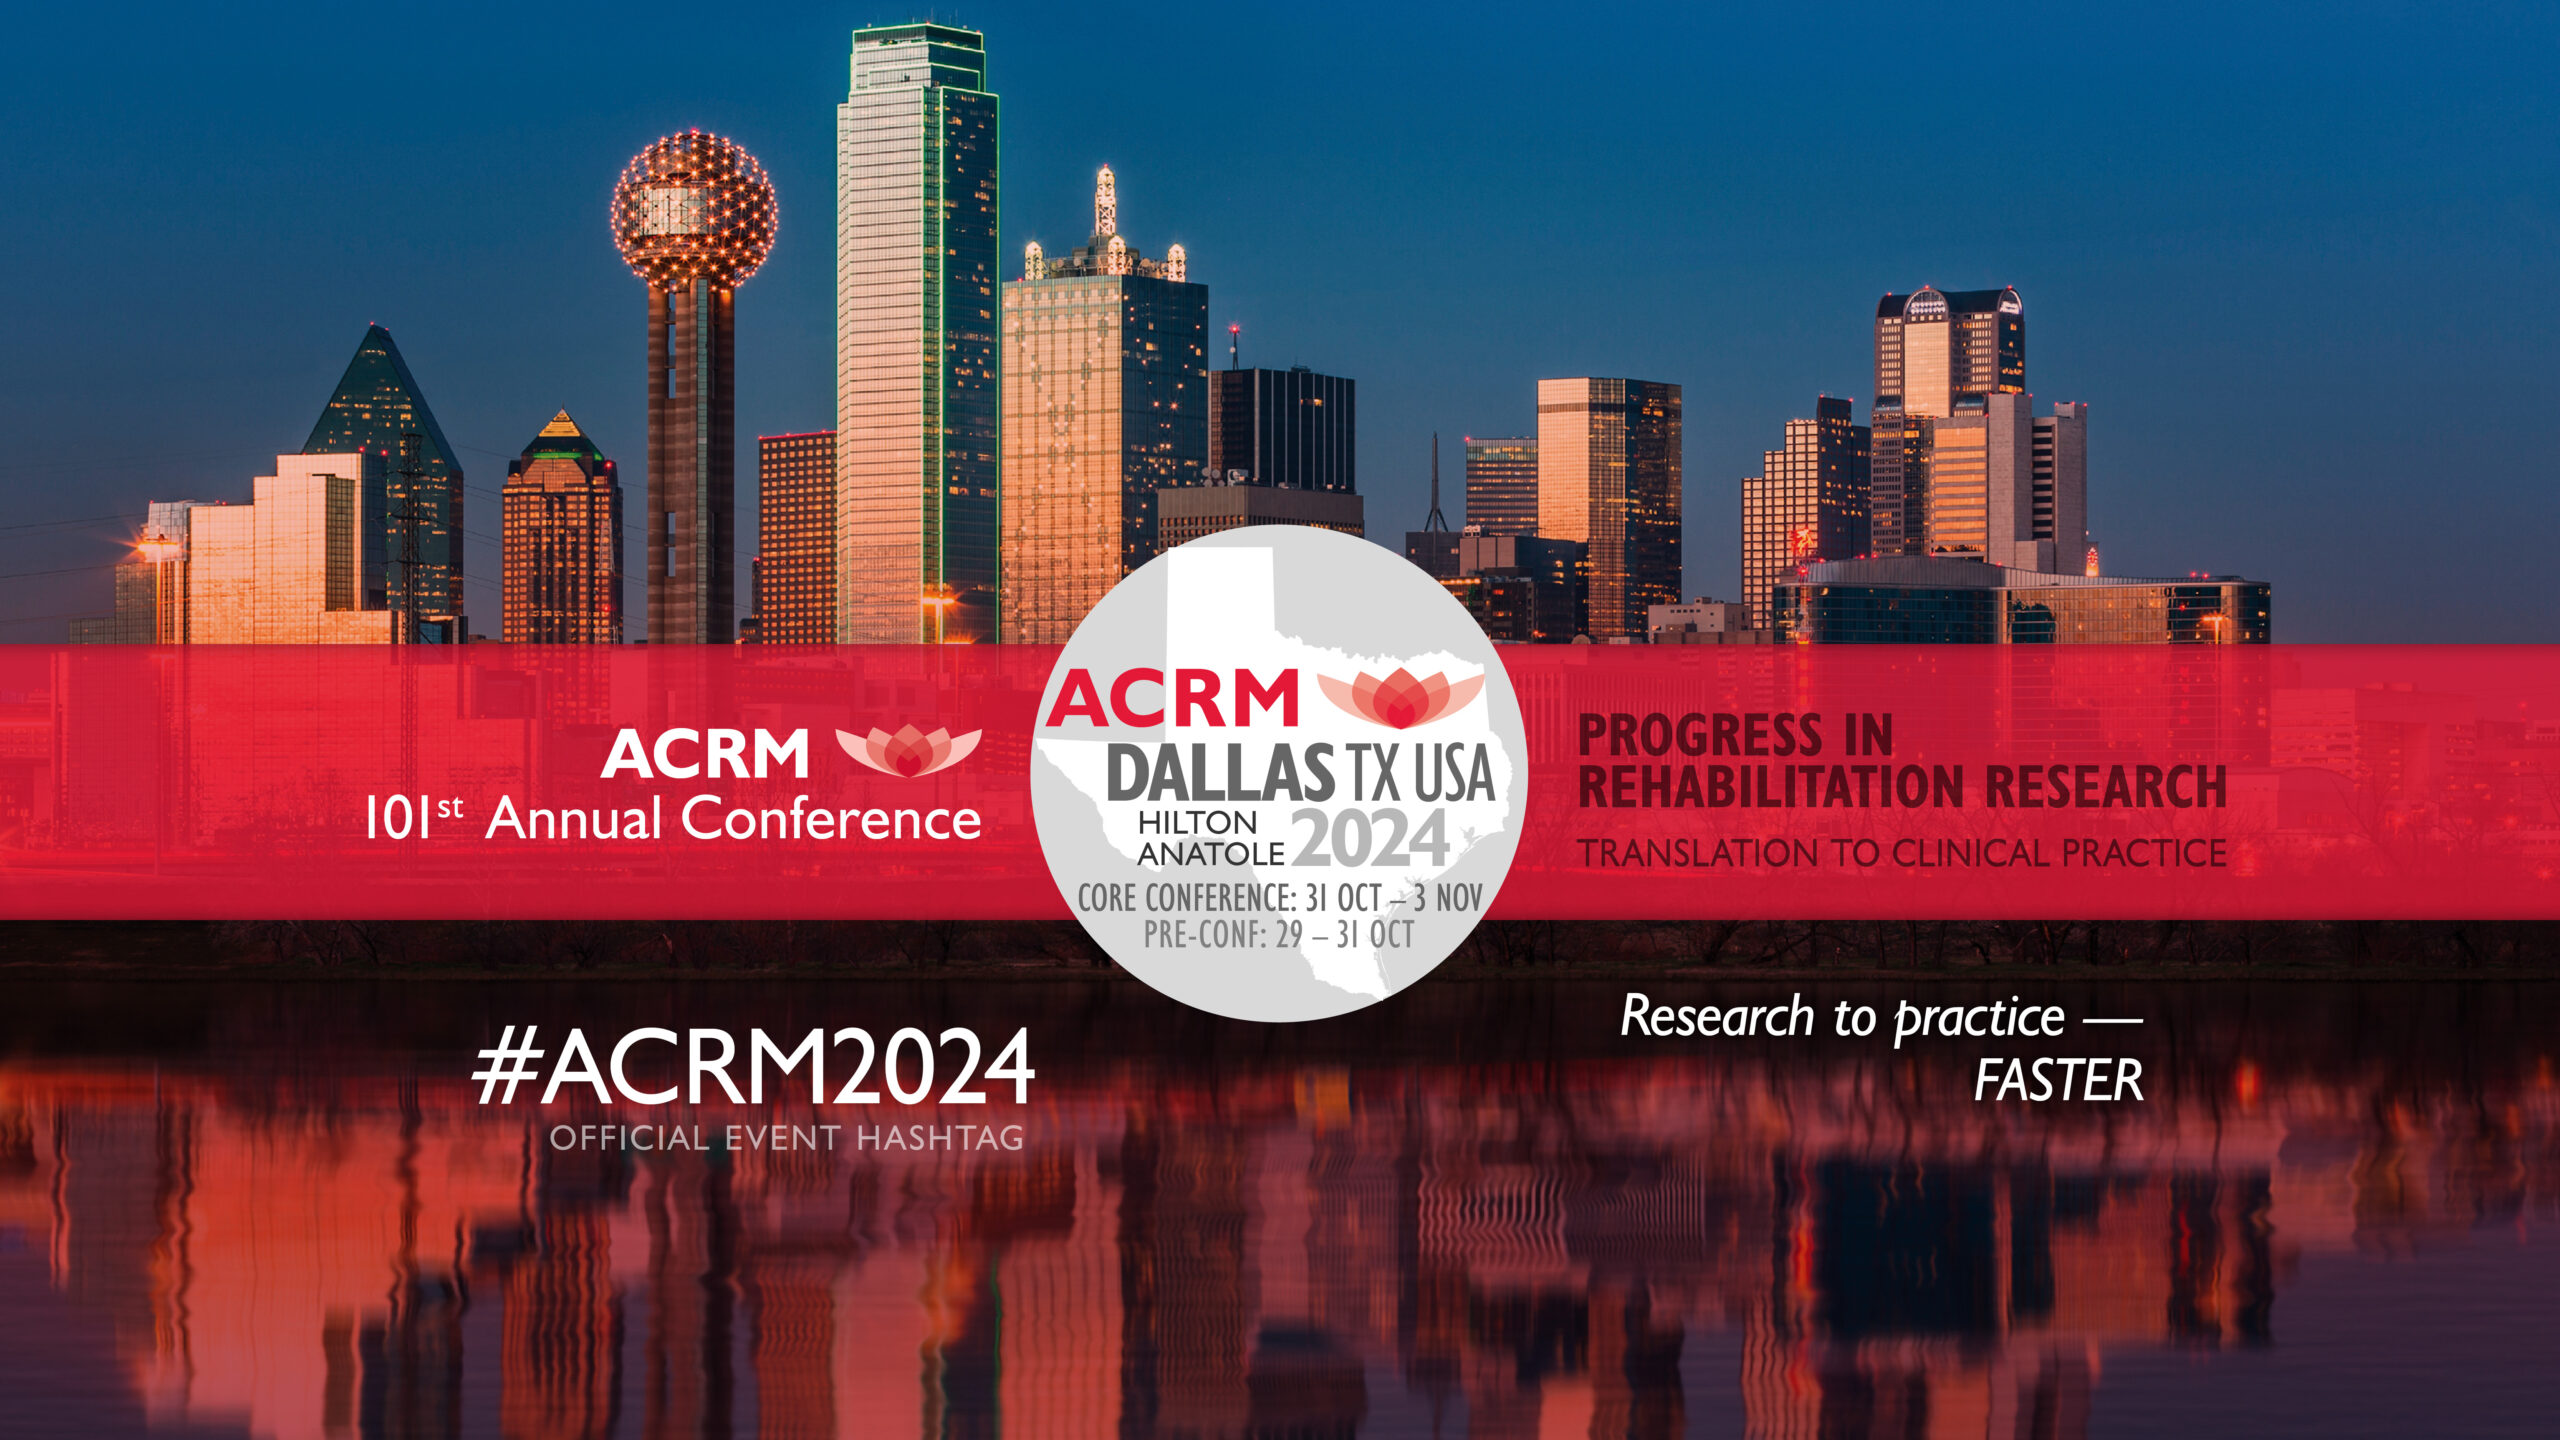 101st Annual Conference of the American Congress of Rehabilitation Medicine - ACRM 2024